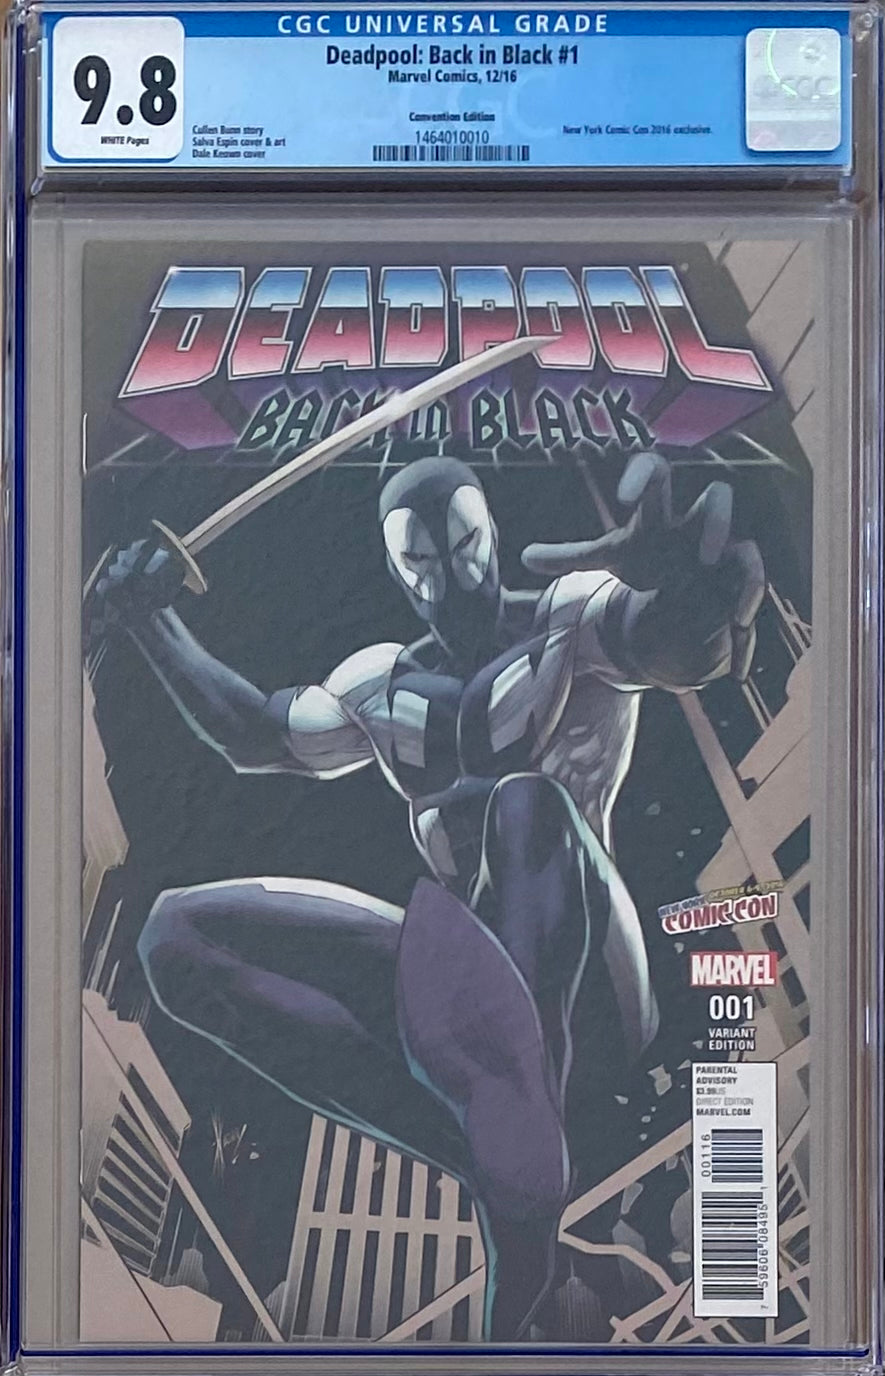 Deadpool: Back in Black #1 Keown NYCC Convention Edition Variant CGC 9.8